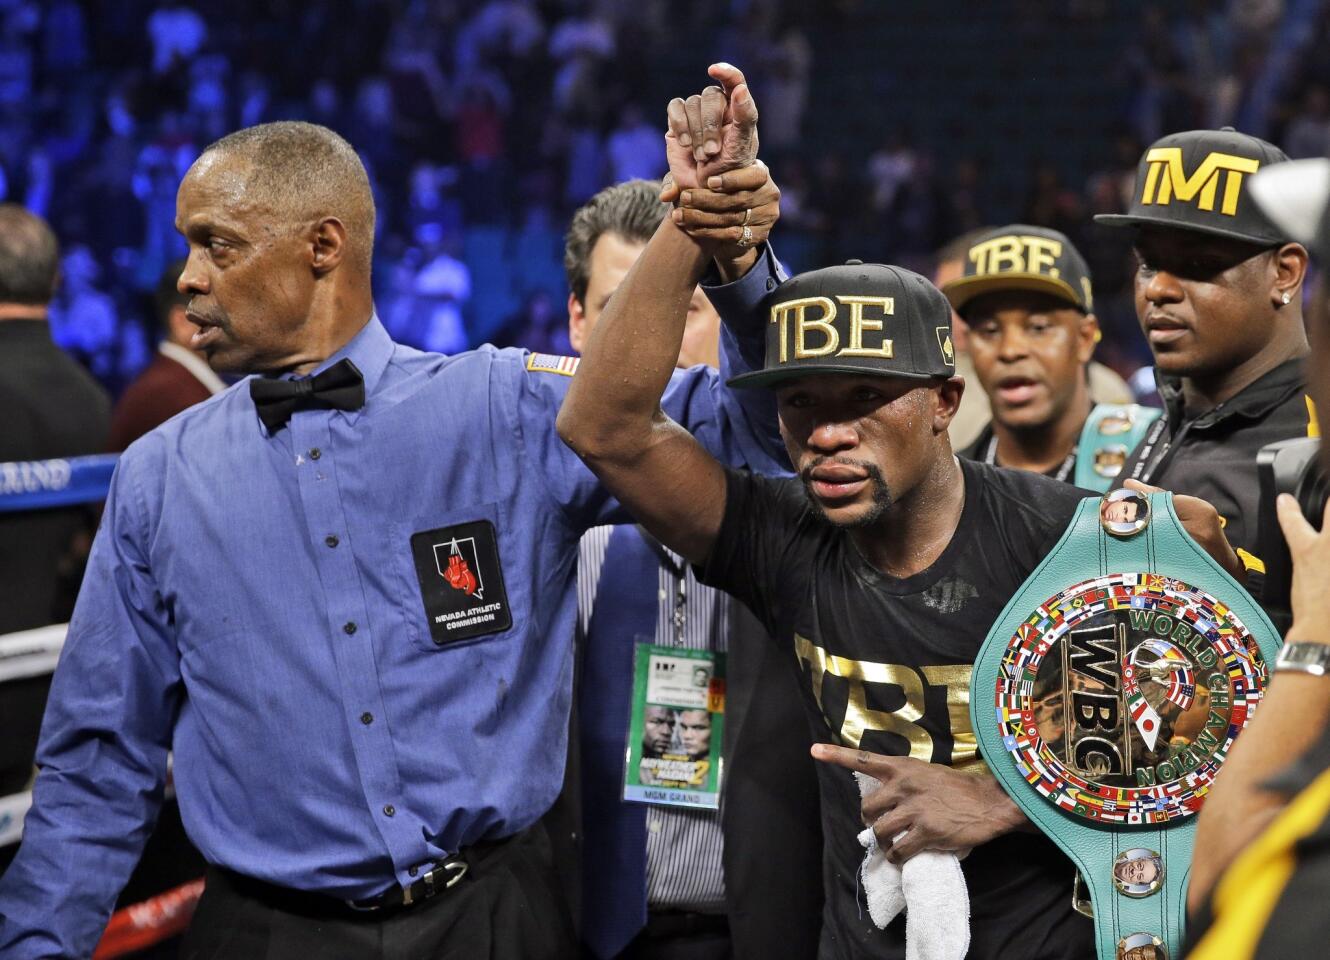 Referee Kenny Bayless raises the right hand of Floyd Mayweather Jr. after he defeated Marcos Maidana by unanimous decision on Saturday night in the world welterweight title fight.